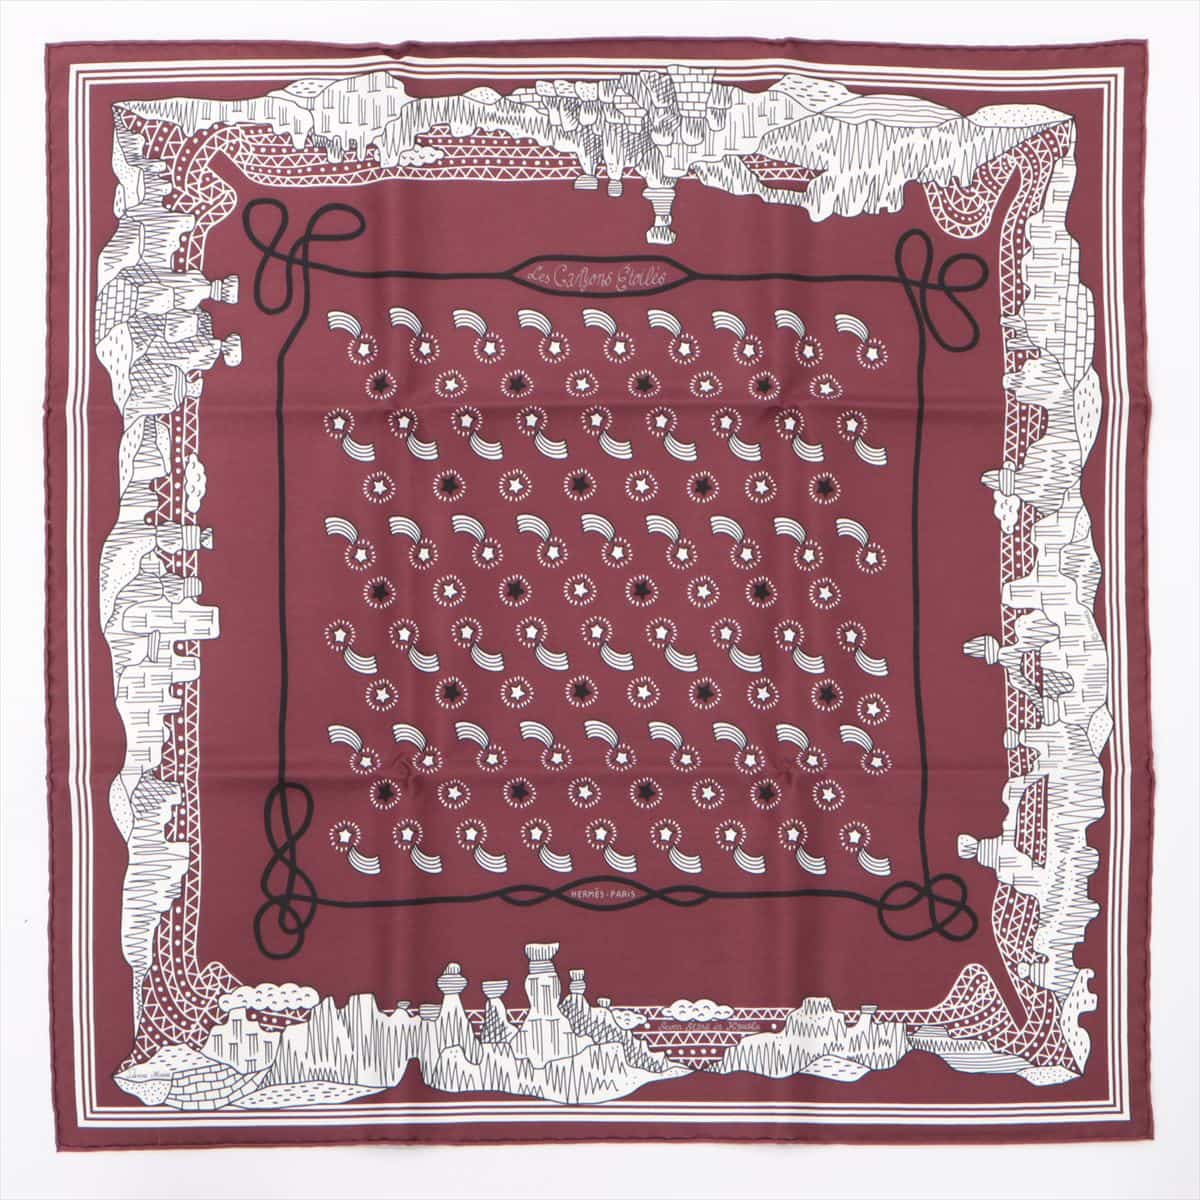 Hermès Carré 55 Les Canyons Etoiles From the canyon to the stars Scarf Silk Bordeaux